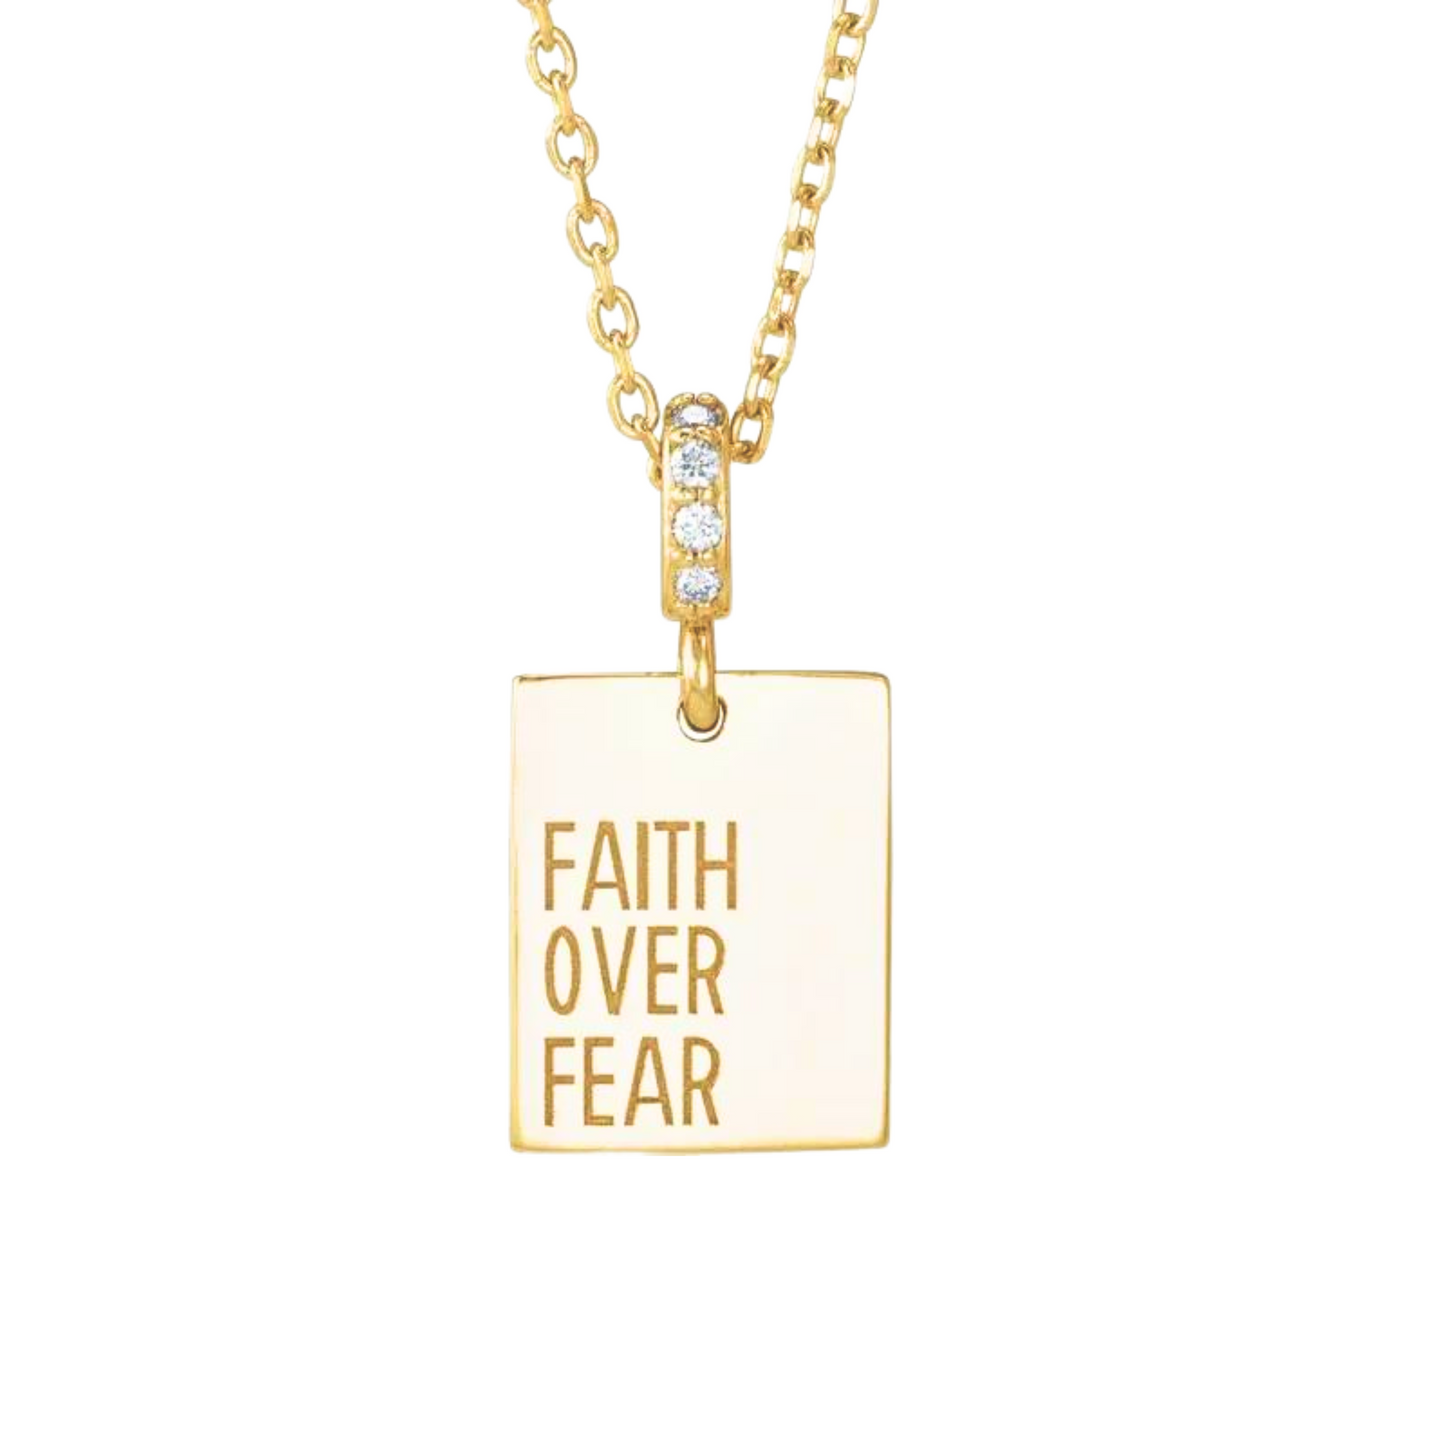 The Jan Necklace – 14K Yellow Gold .02 CTW Natural Diamond Faith Over Fear 16-18" Necklace